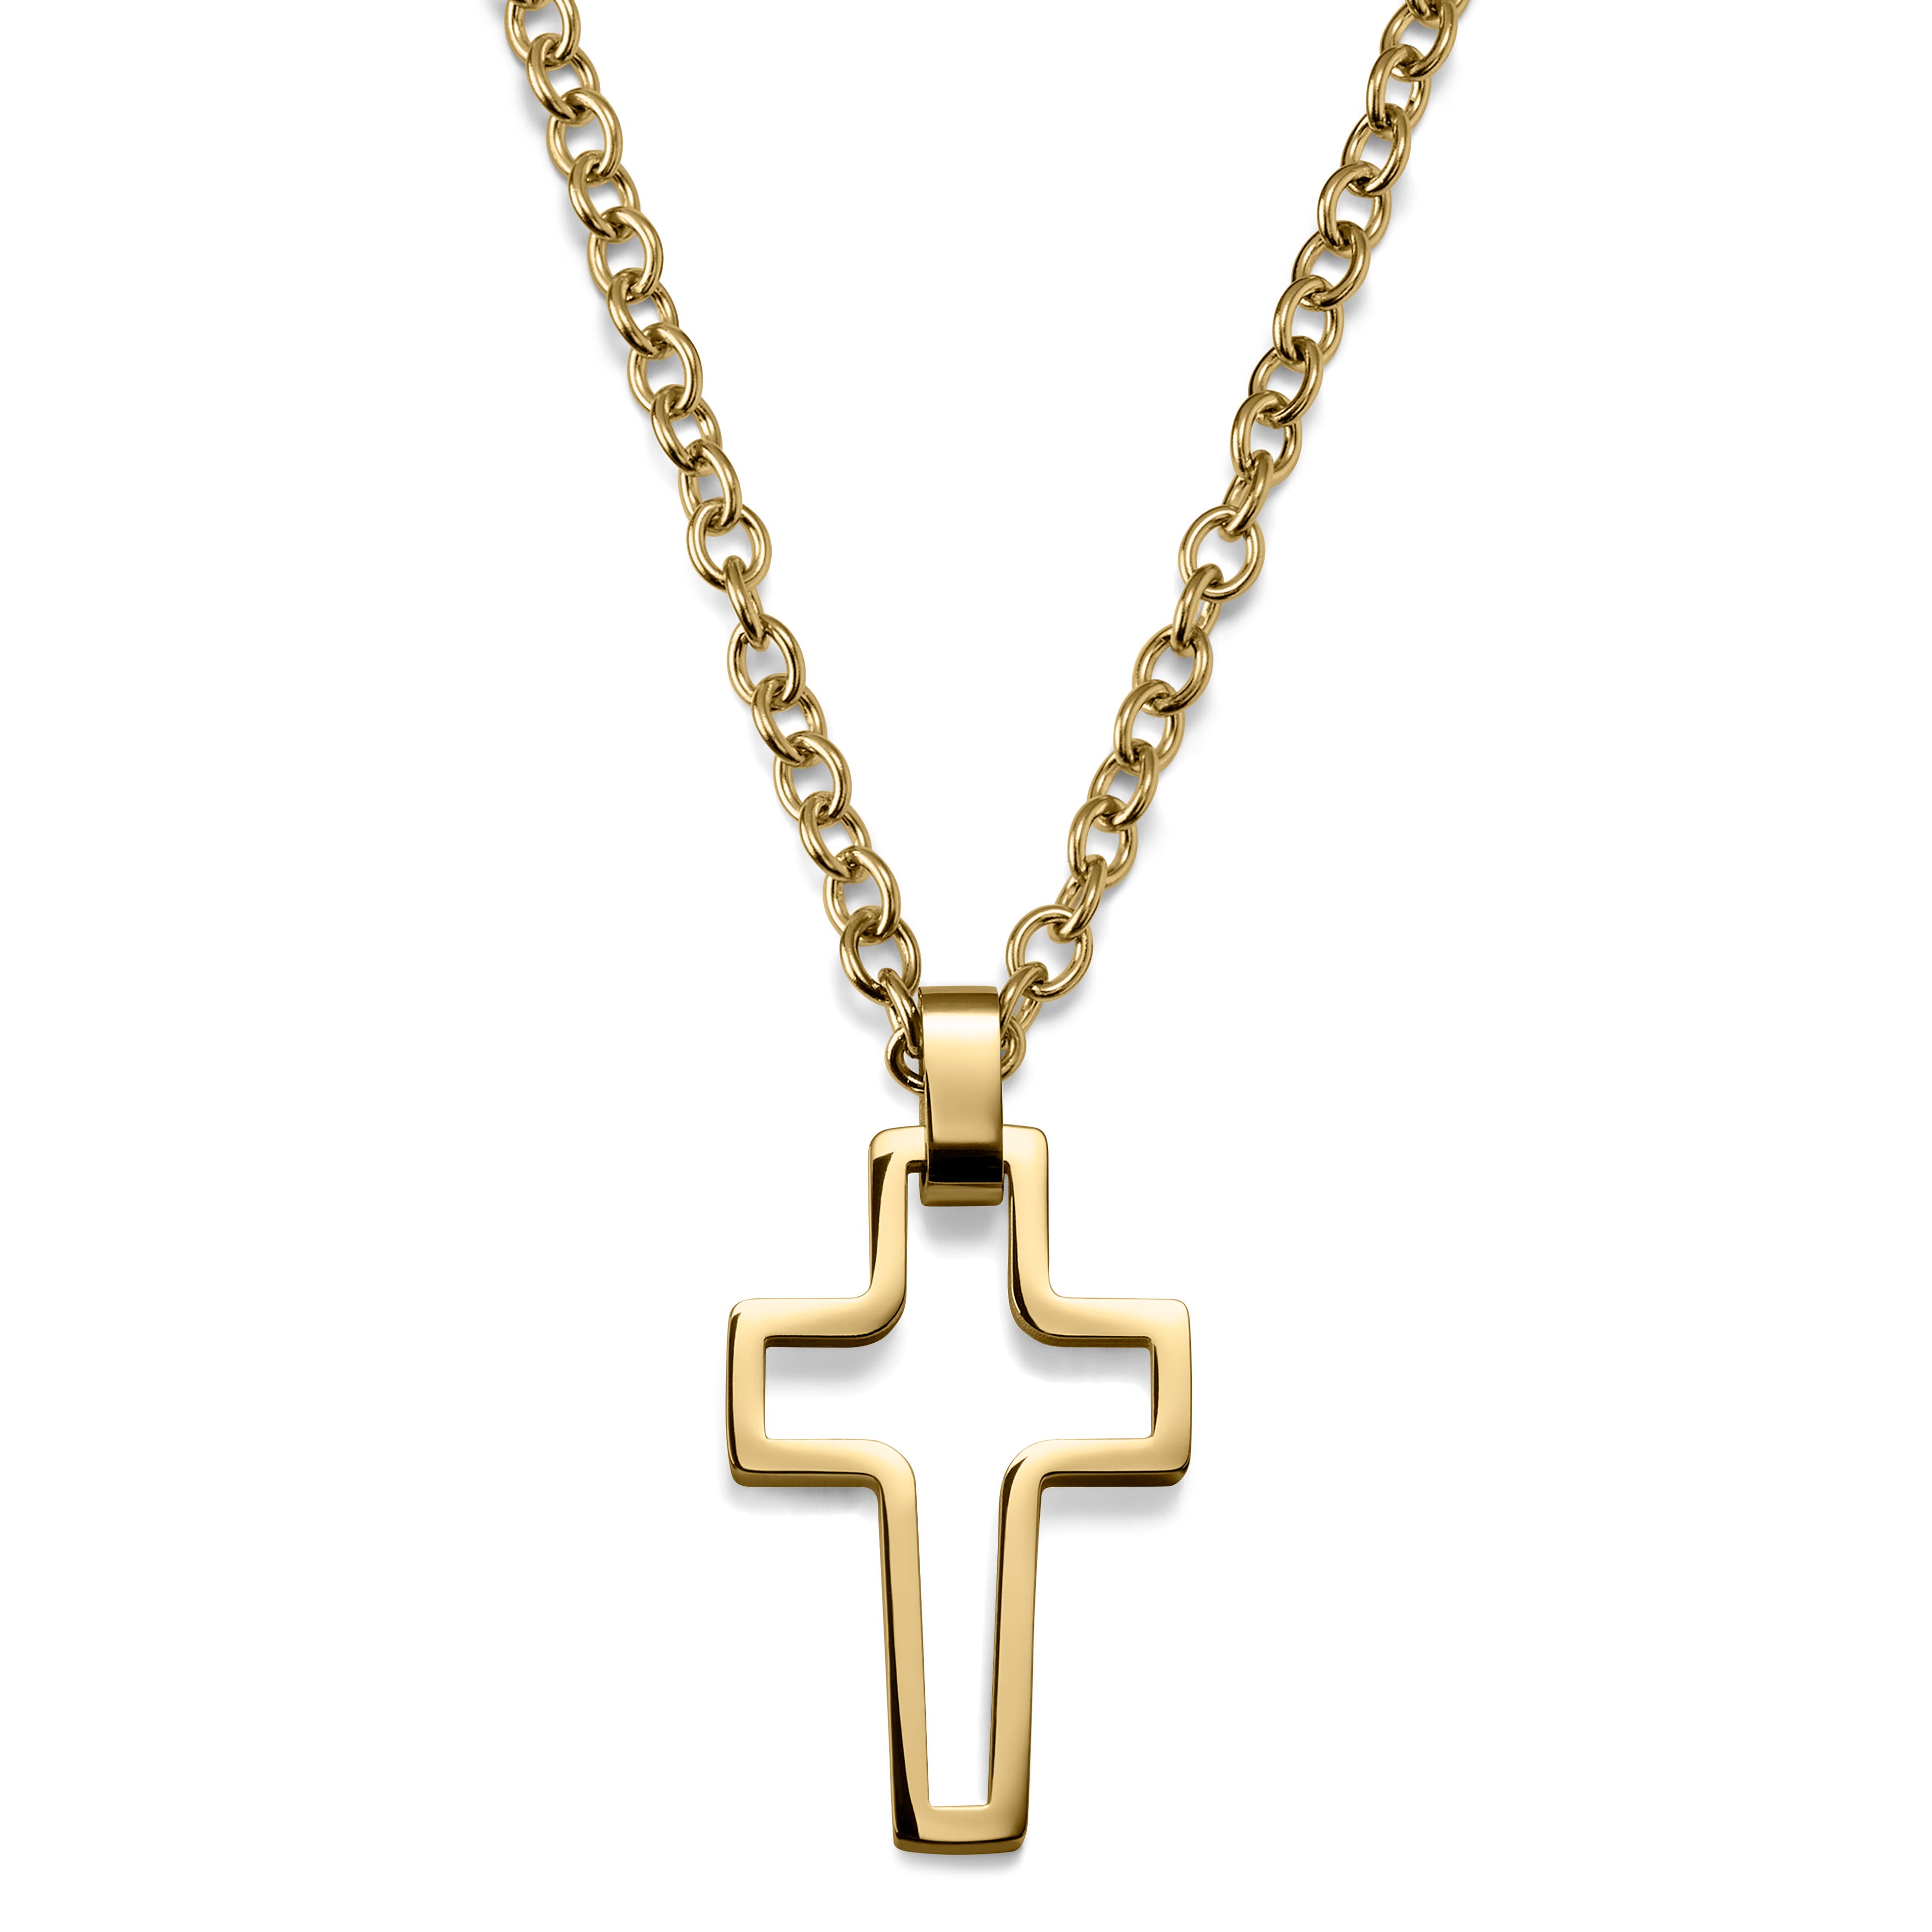 Gold-Tone With Hollow Cross Cable Chain Necklace